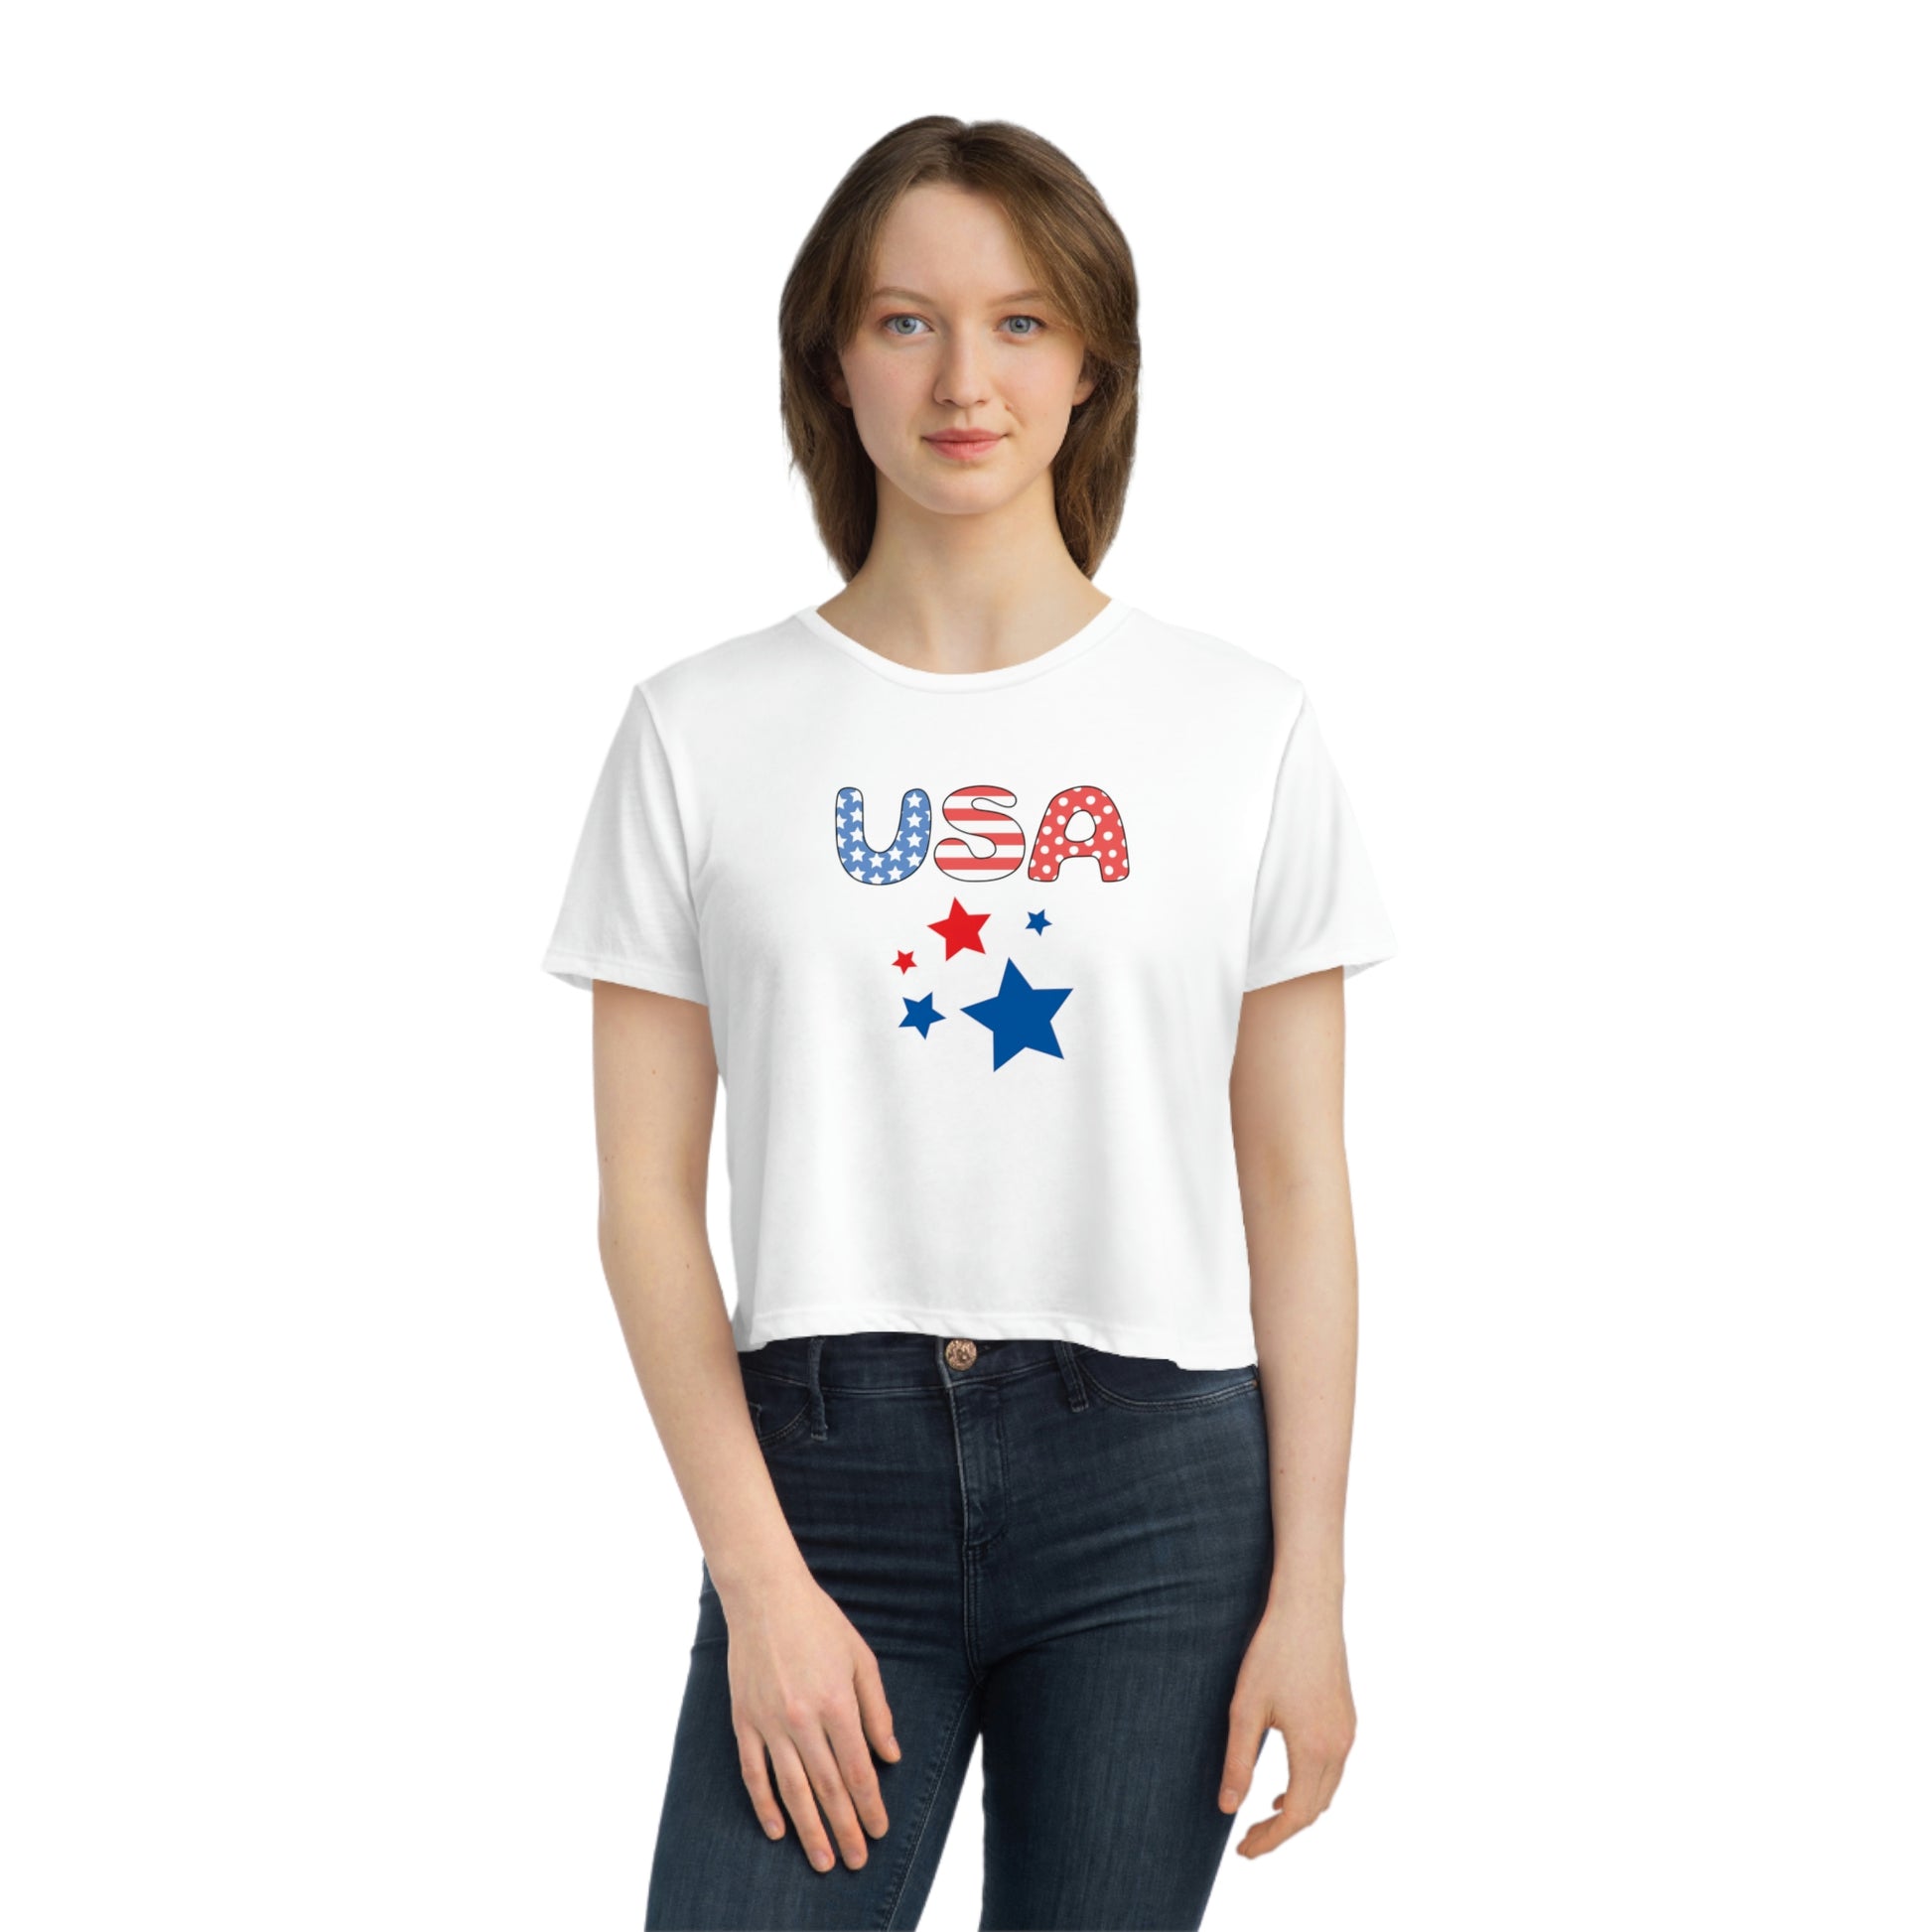 Mock up of a slim woman wearing our White shirt